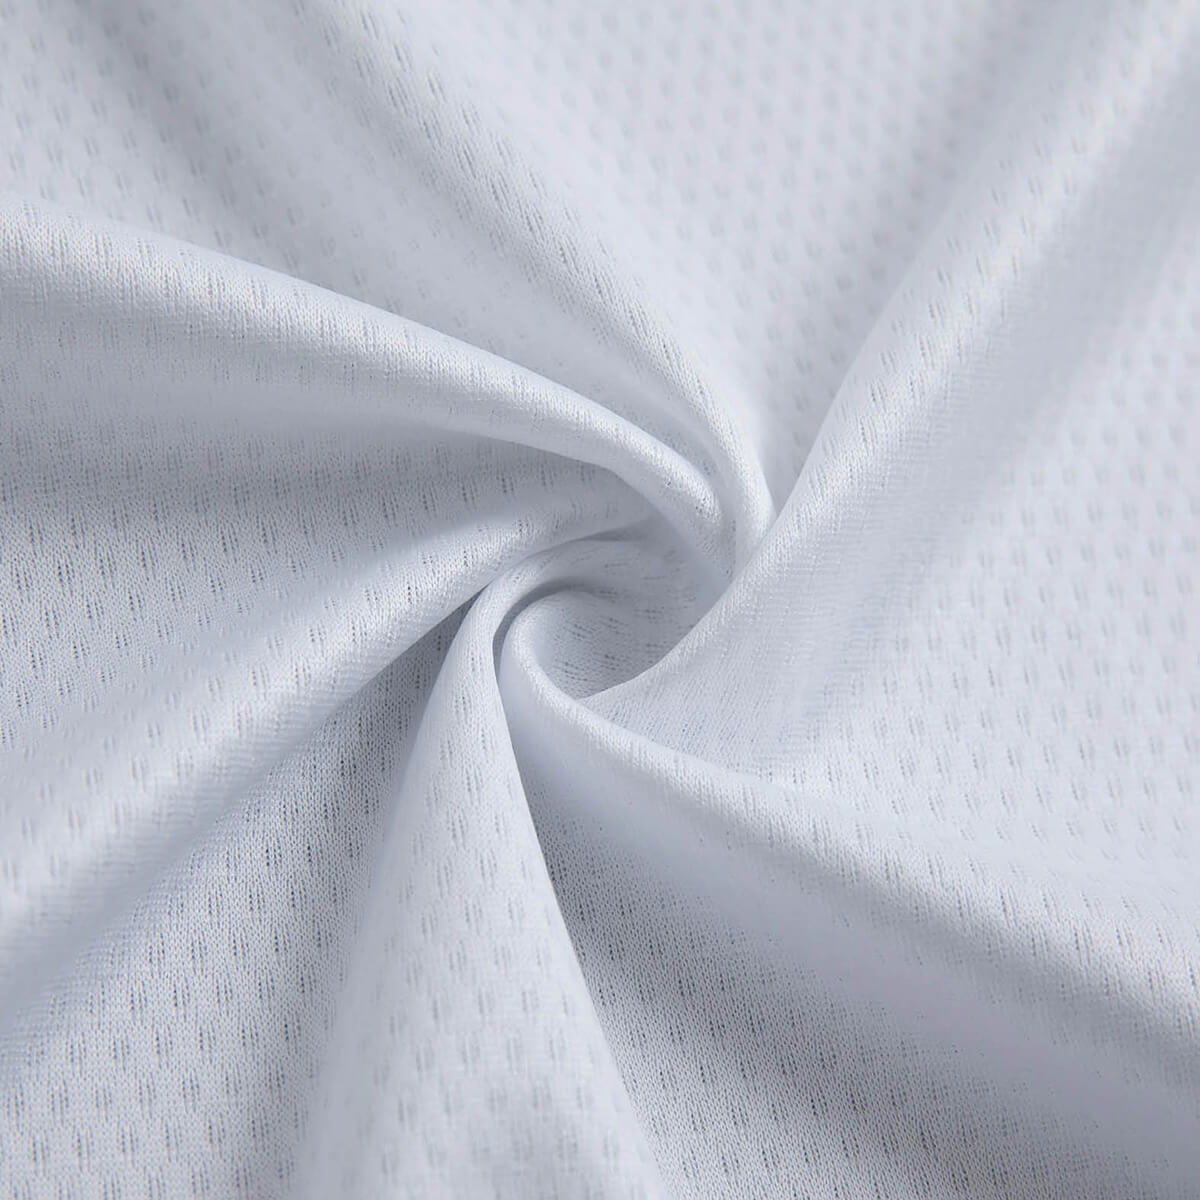 Breathable fabric for comfortable cycling experience